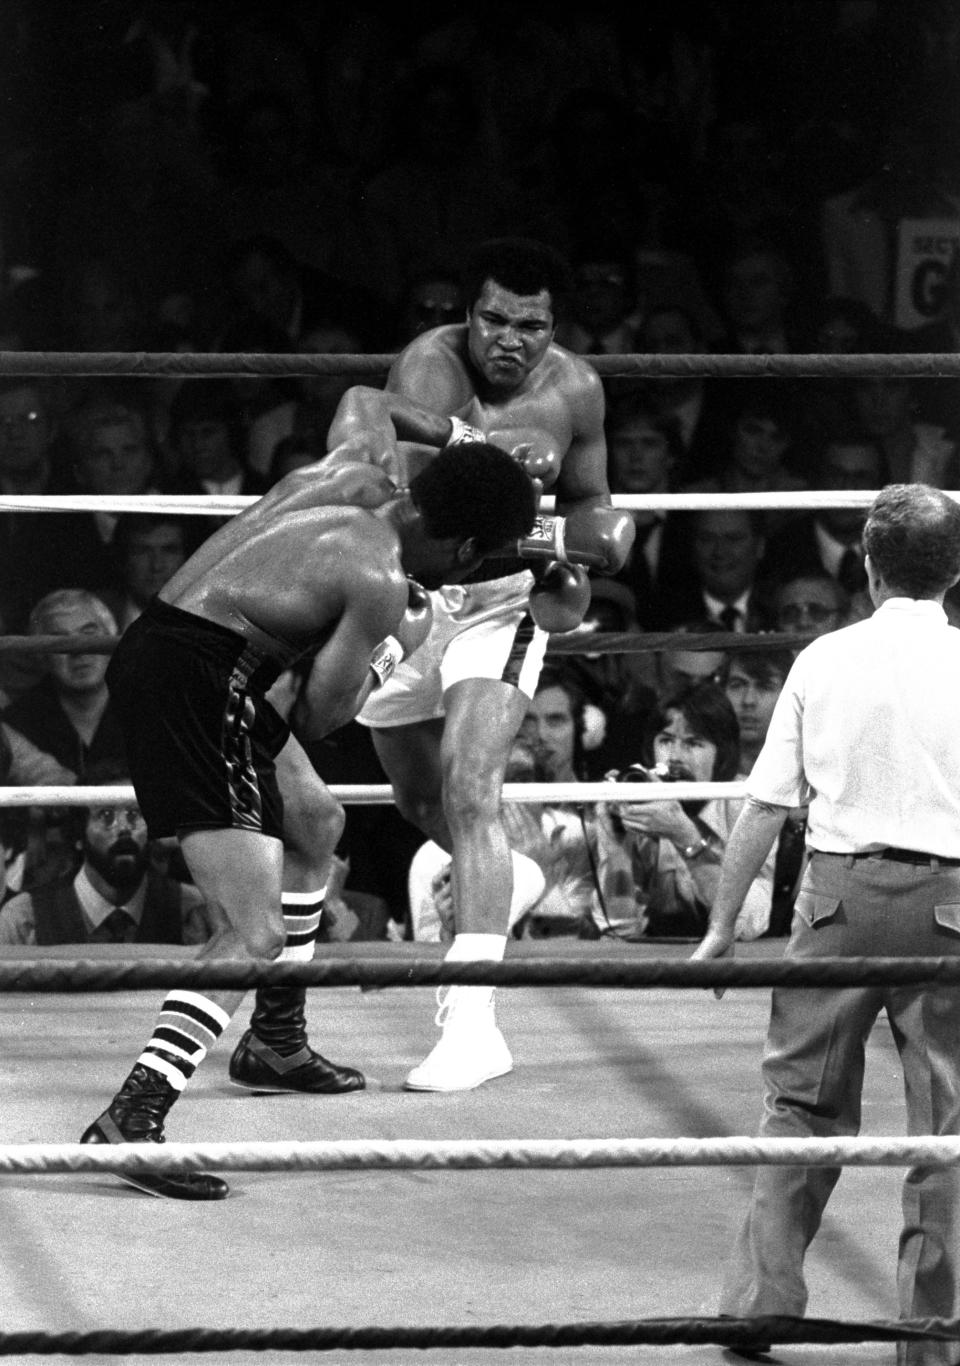 FILE - In this 1978 photo taken by Leonard Ignelzi, Muhammad Ali connects with a right cross to the head of challenger Leon Spinks during the third round of a boxing bout in Las Vegas. Ignelzi, whose knack for being in the right place at the right time produced breathtaking images of Hall of Fame sports figures, life along the U.S.-Mexico border, devastating wildfires and numerous other major news events over nearly four decades as a photographer for The Associated Press in San Diego, has died. He was 74. (AP Photo/Lenny Ignelzi, File)